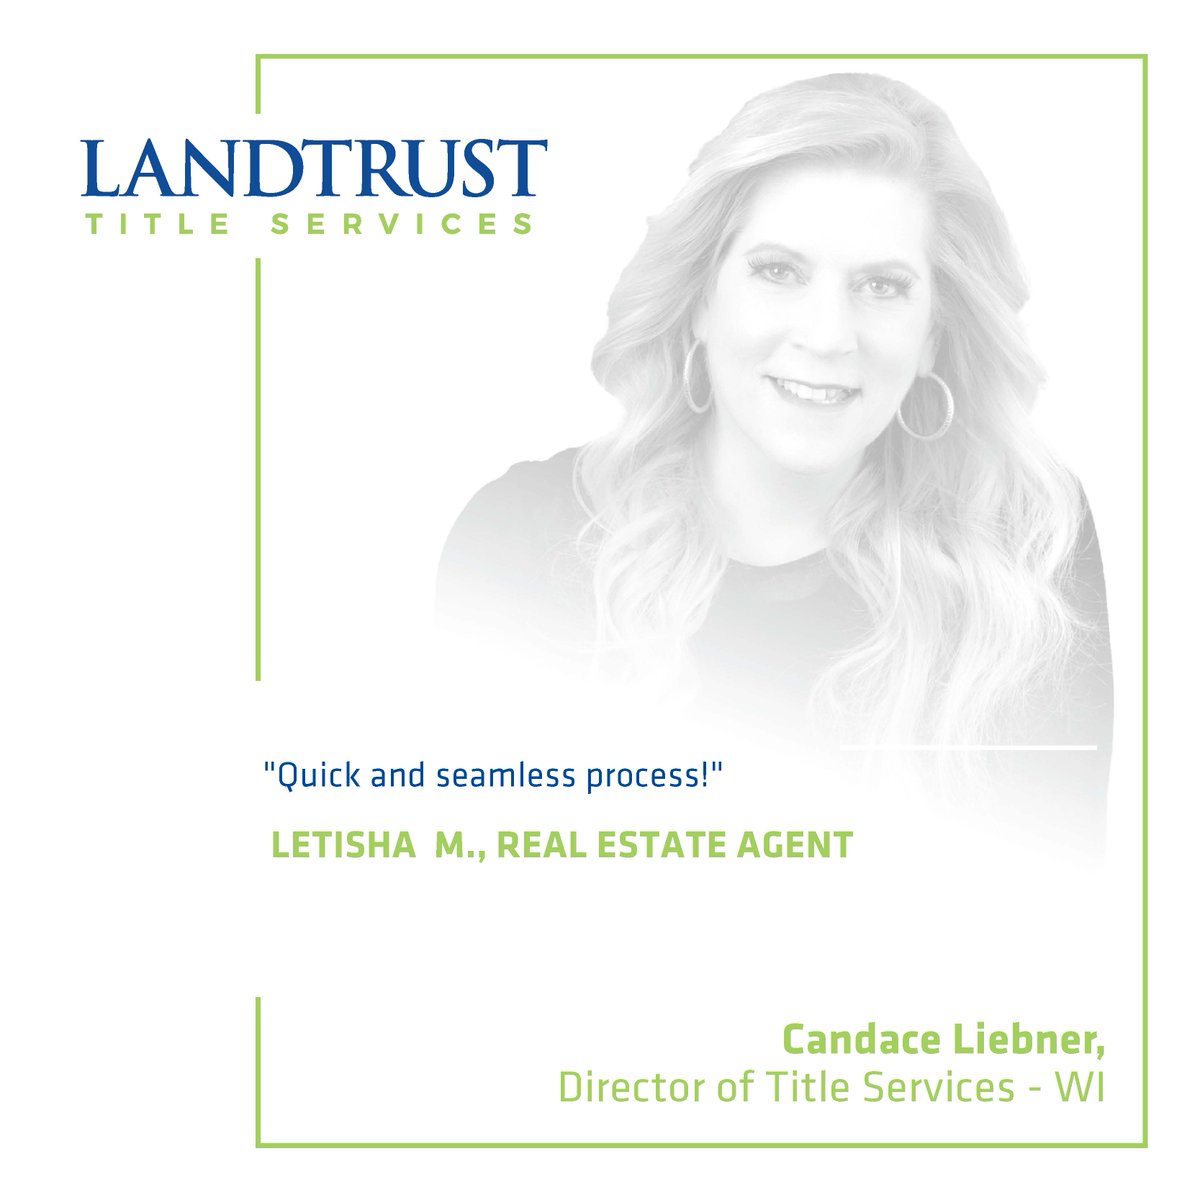 Partnering with the right team makes all the difference. 

At Landtrust, we’re dedicated to delivering outstanding service and operational excellence!

#Wisconsin #Wisconsinrealestate #realestateprofessionals #team #testimonial #CX #customerservice #clientservicing #growth